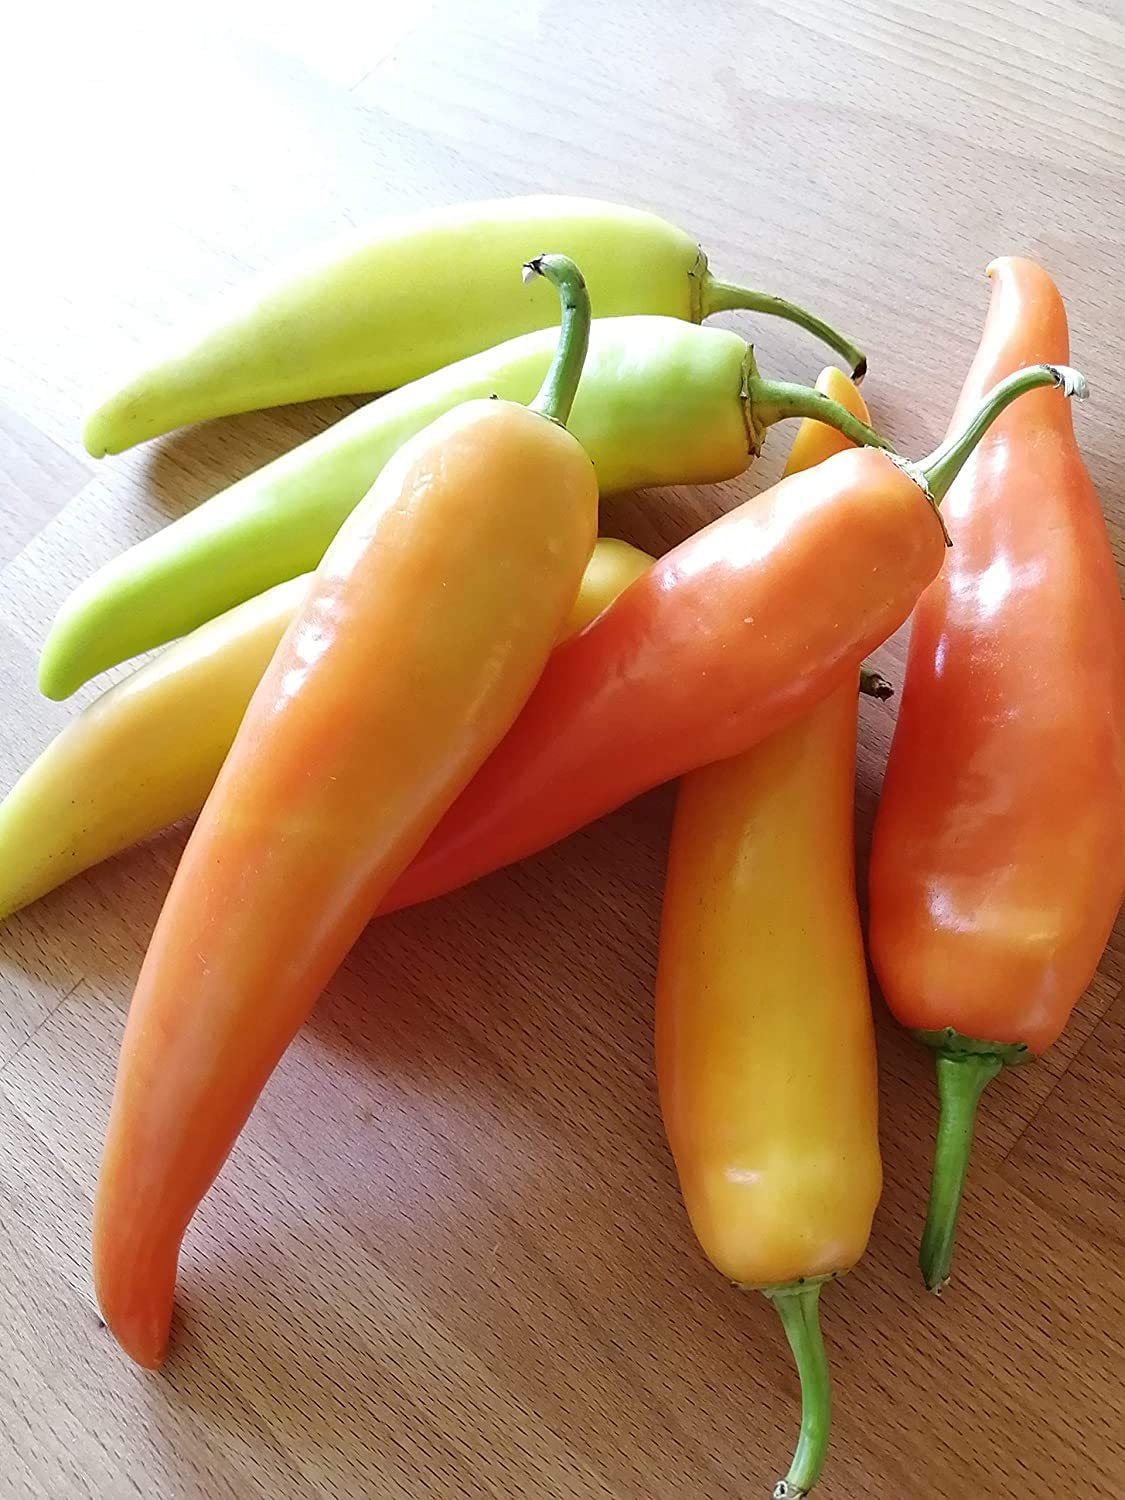 Hundredfold Hungarian Hot Wax Pepper 50 Vegetable Seeds - Capsicum Annuum, Hot Banana, Non-GMO, for Pickle and Roast, Excellent for Container, Patio and Raised Bed